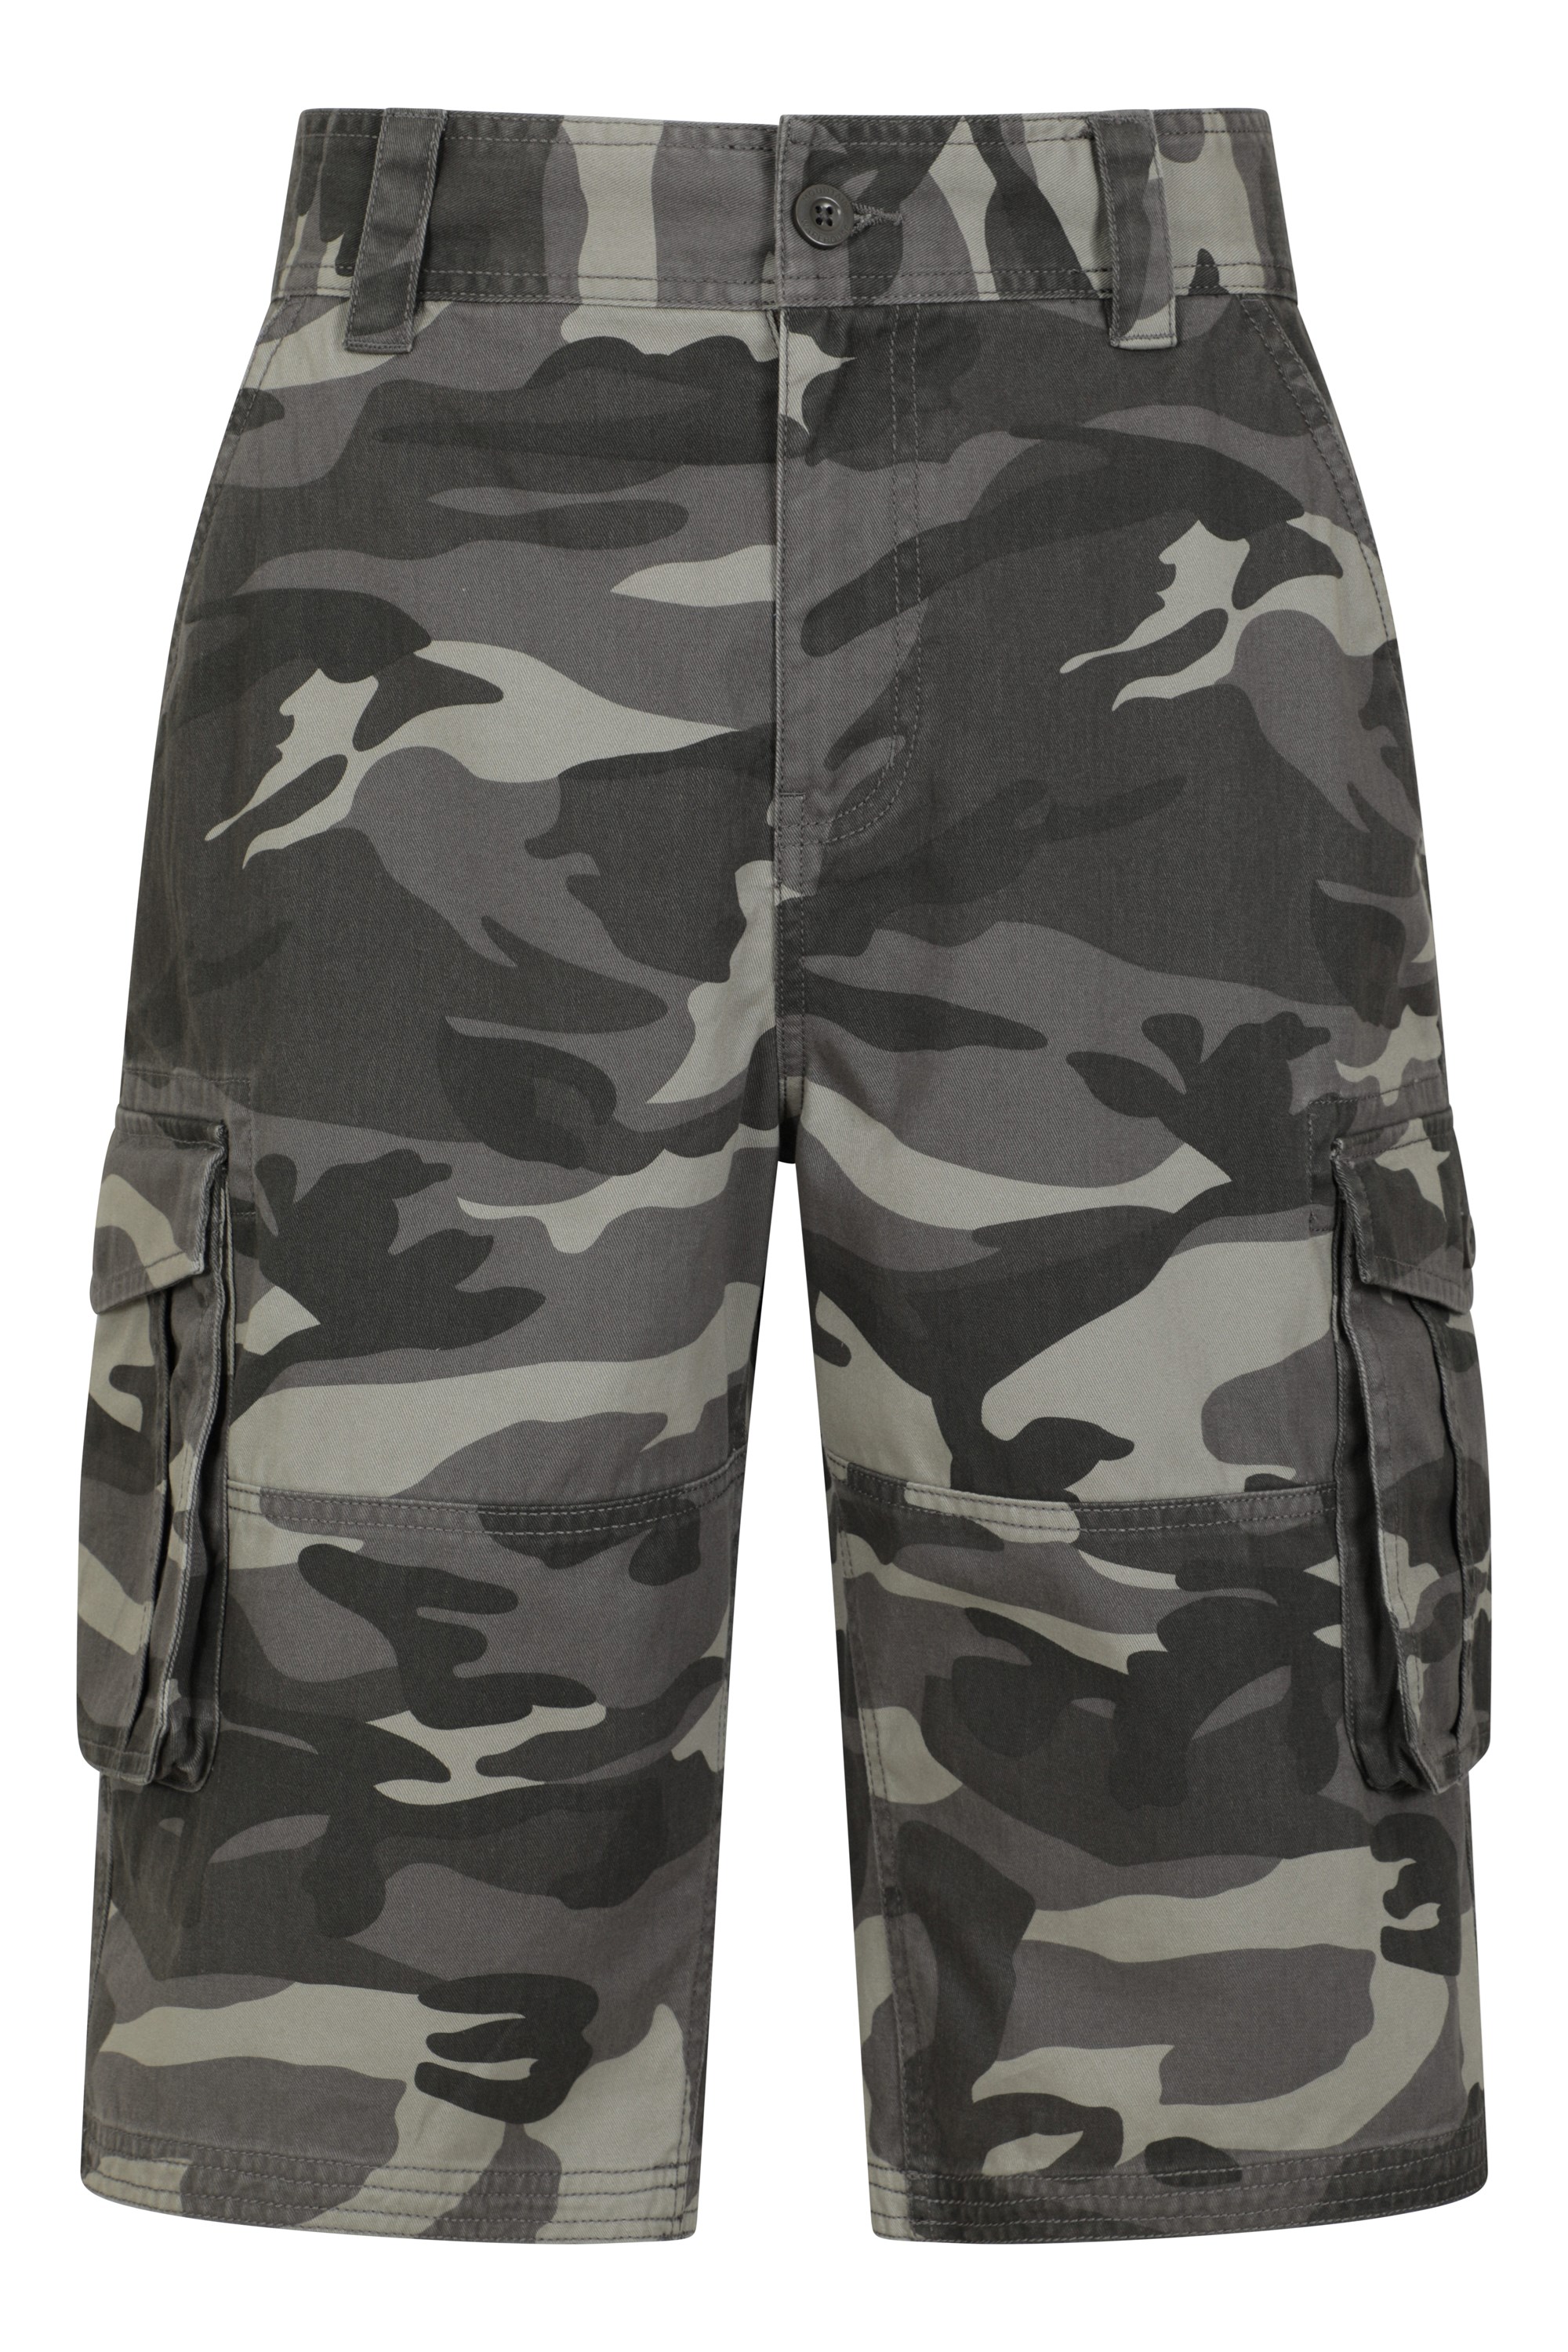 YYDGH Camouflage Cargo Shorts for Men Twill Cotton Print Tactical Work  Shorts Camo Hiking Summer Casual Shorts Gray M 